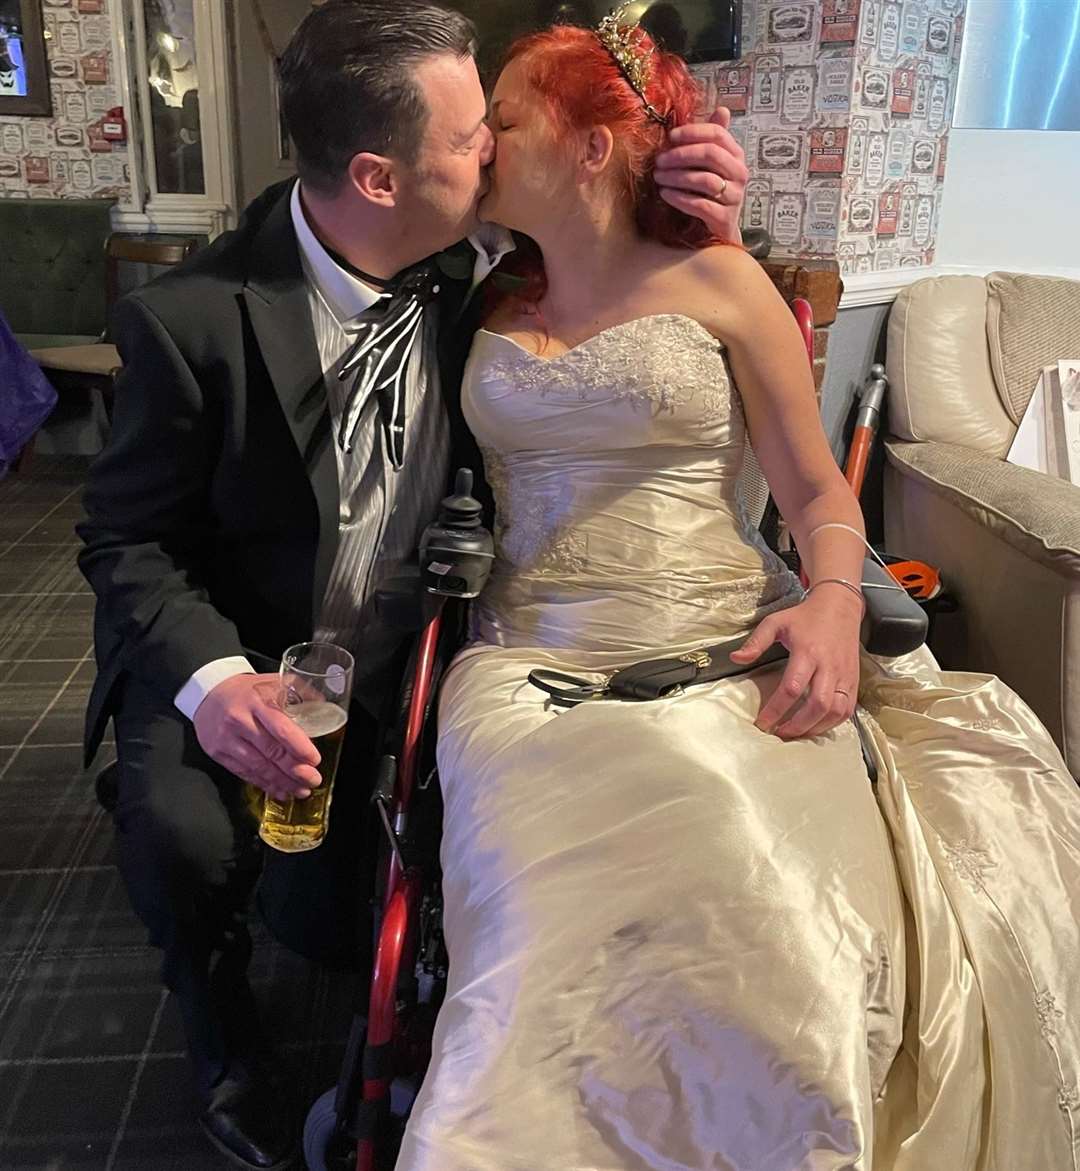 Amy and Ben Peterson married on Halloween at Archbishop's Palace in Maidstone